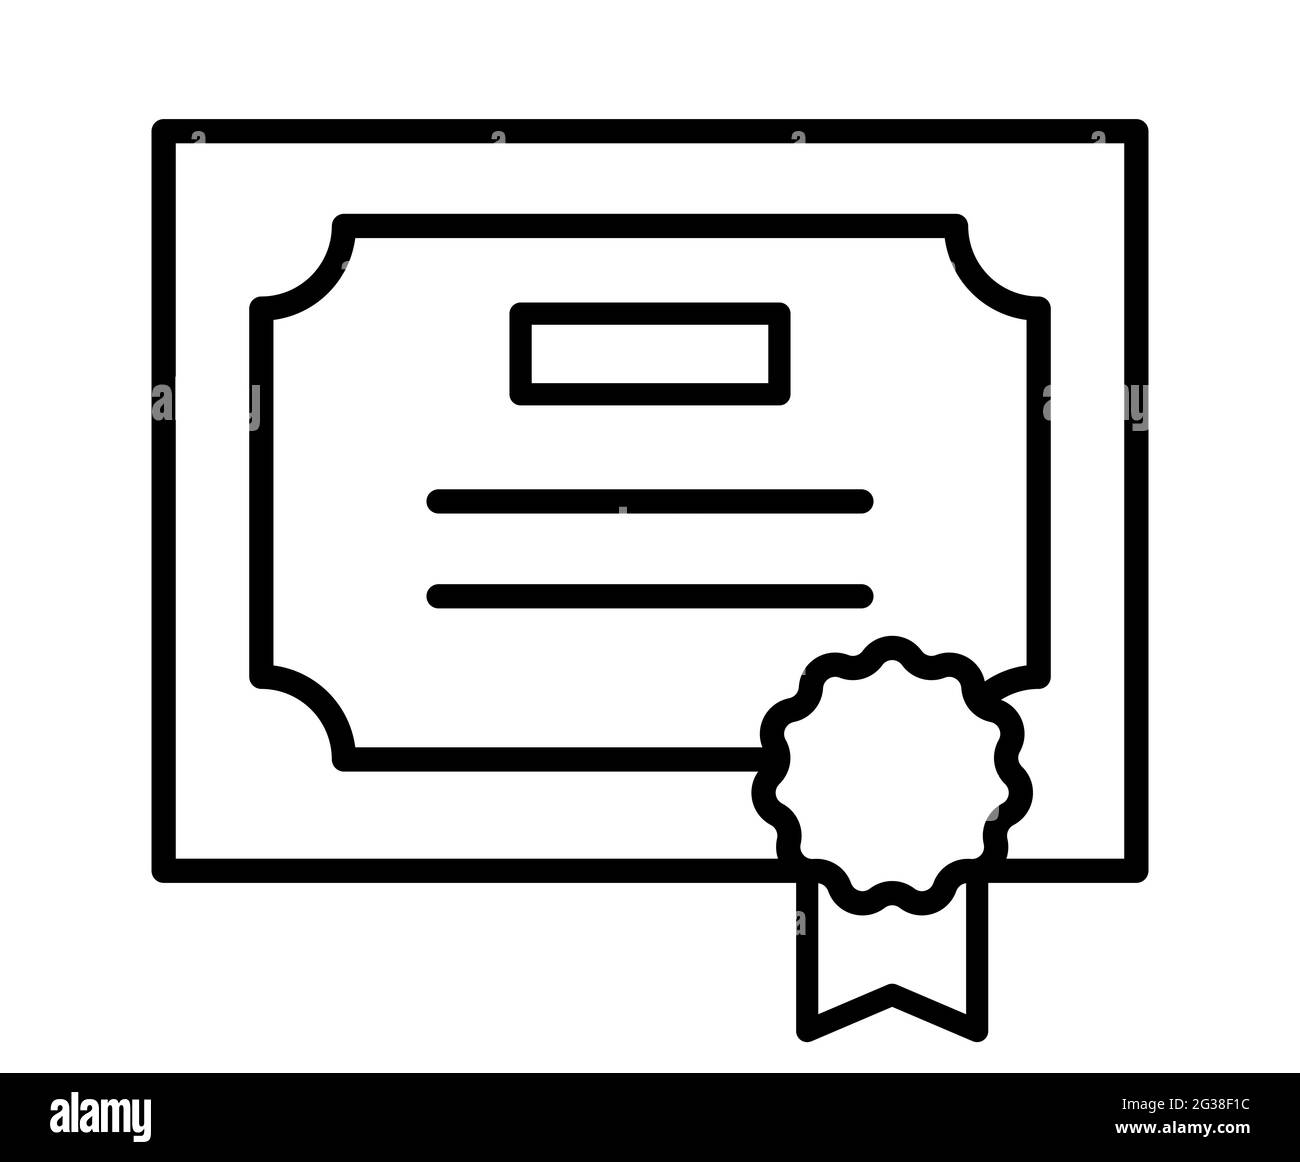 License certificate document paper patent award page symbol vector illustration icon Stock Vector